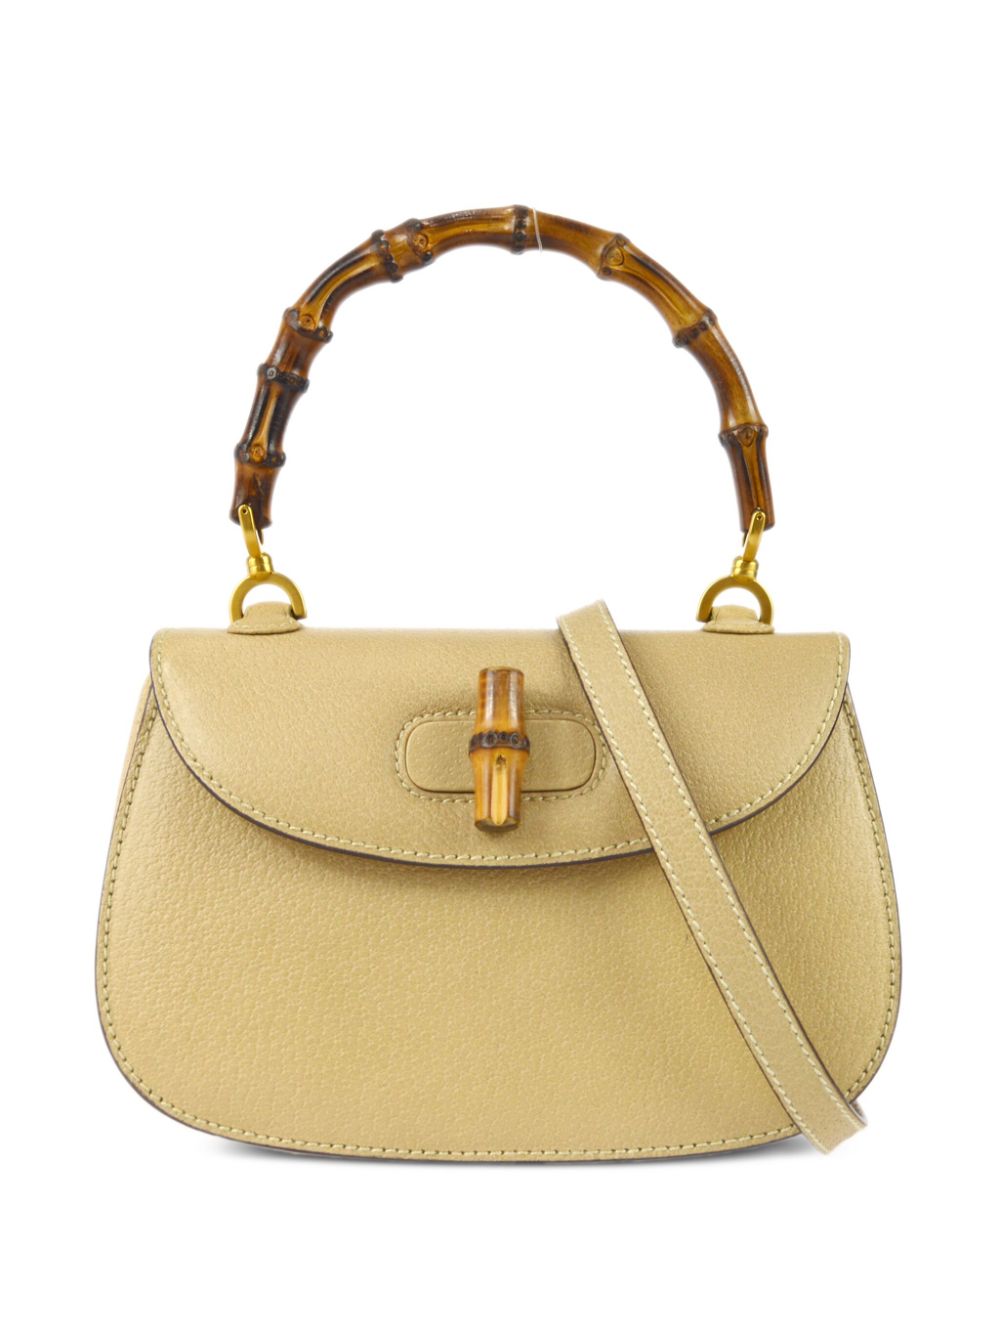 Gucci Bamboo Classic Leather Top Handle - Farfetch